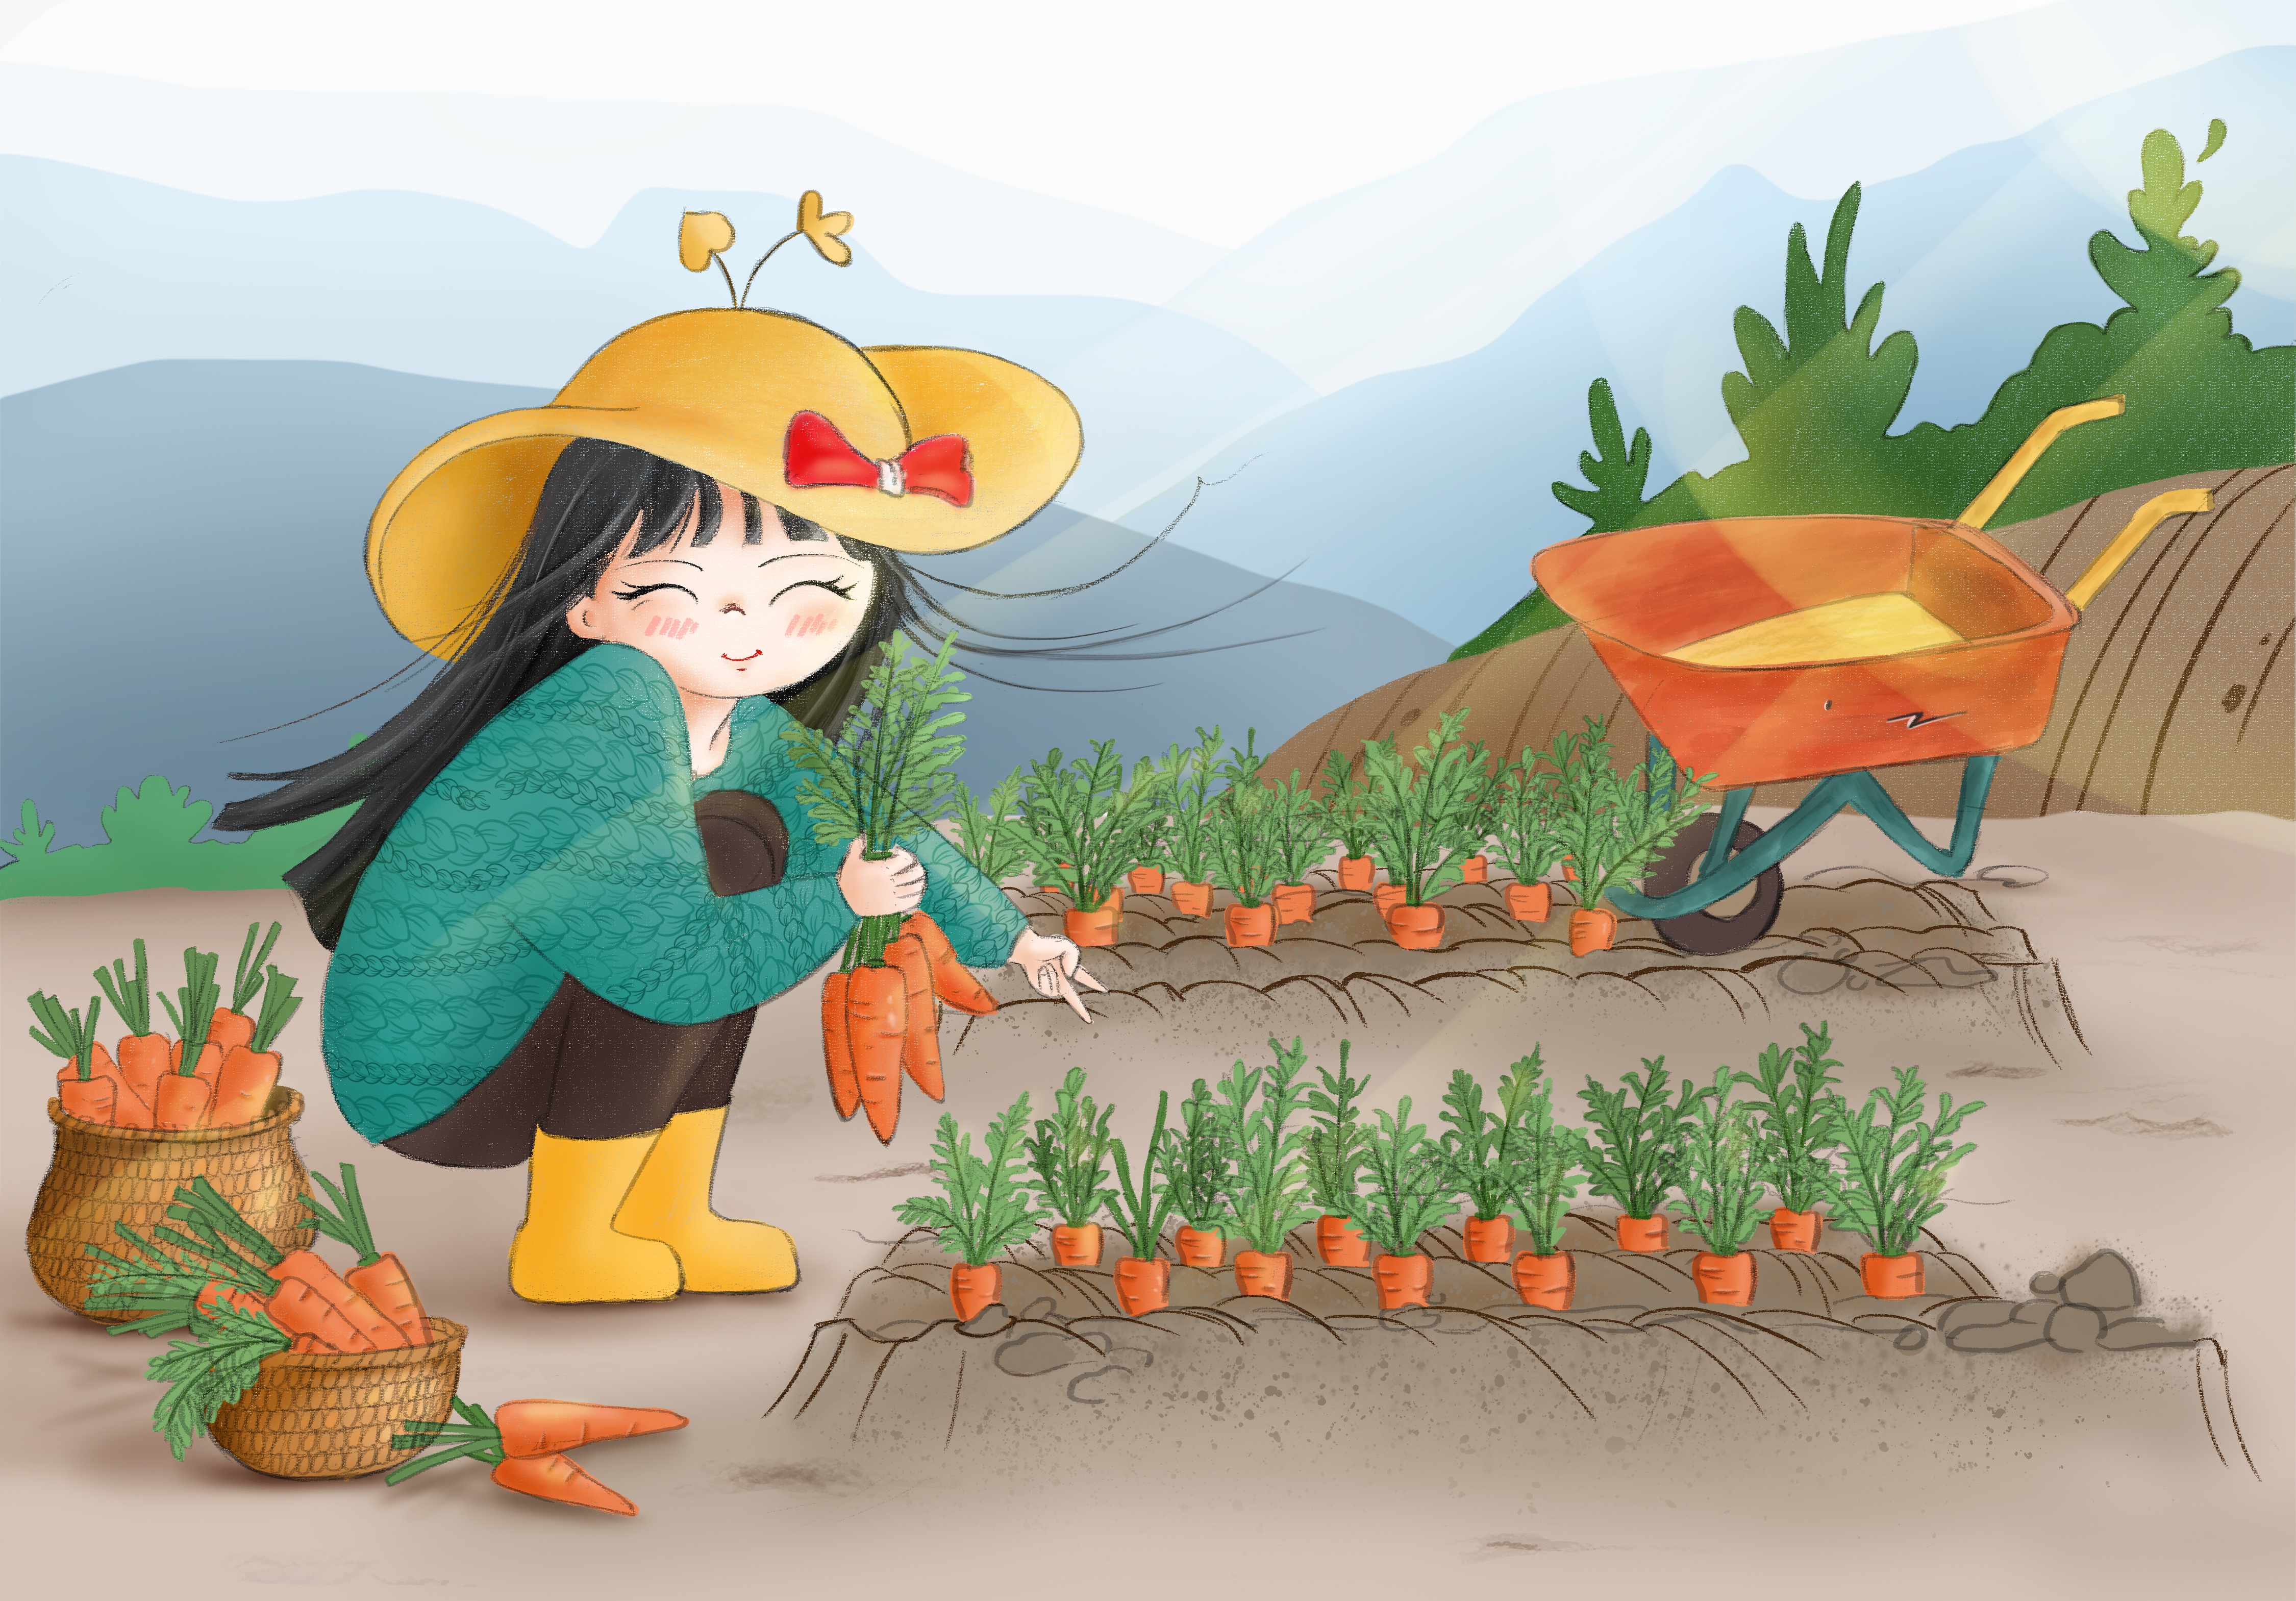 Illustration of a girl pulling carrots in a garden.